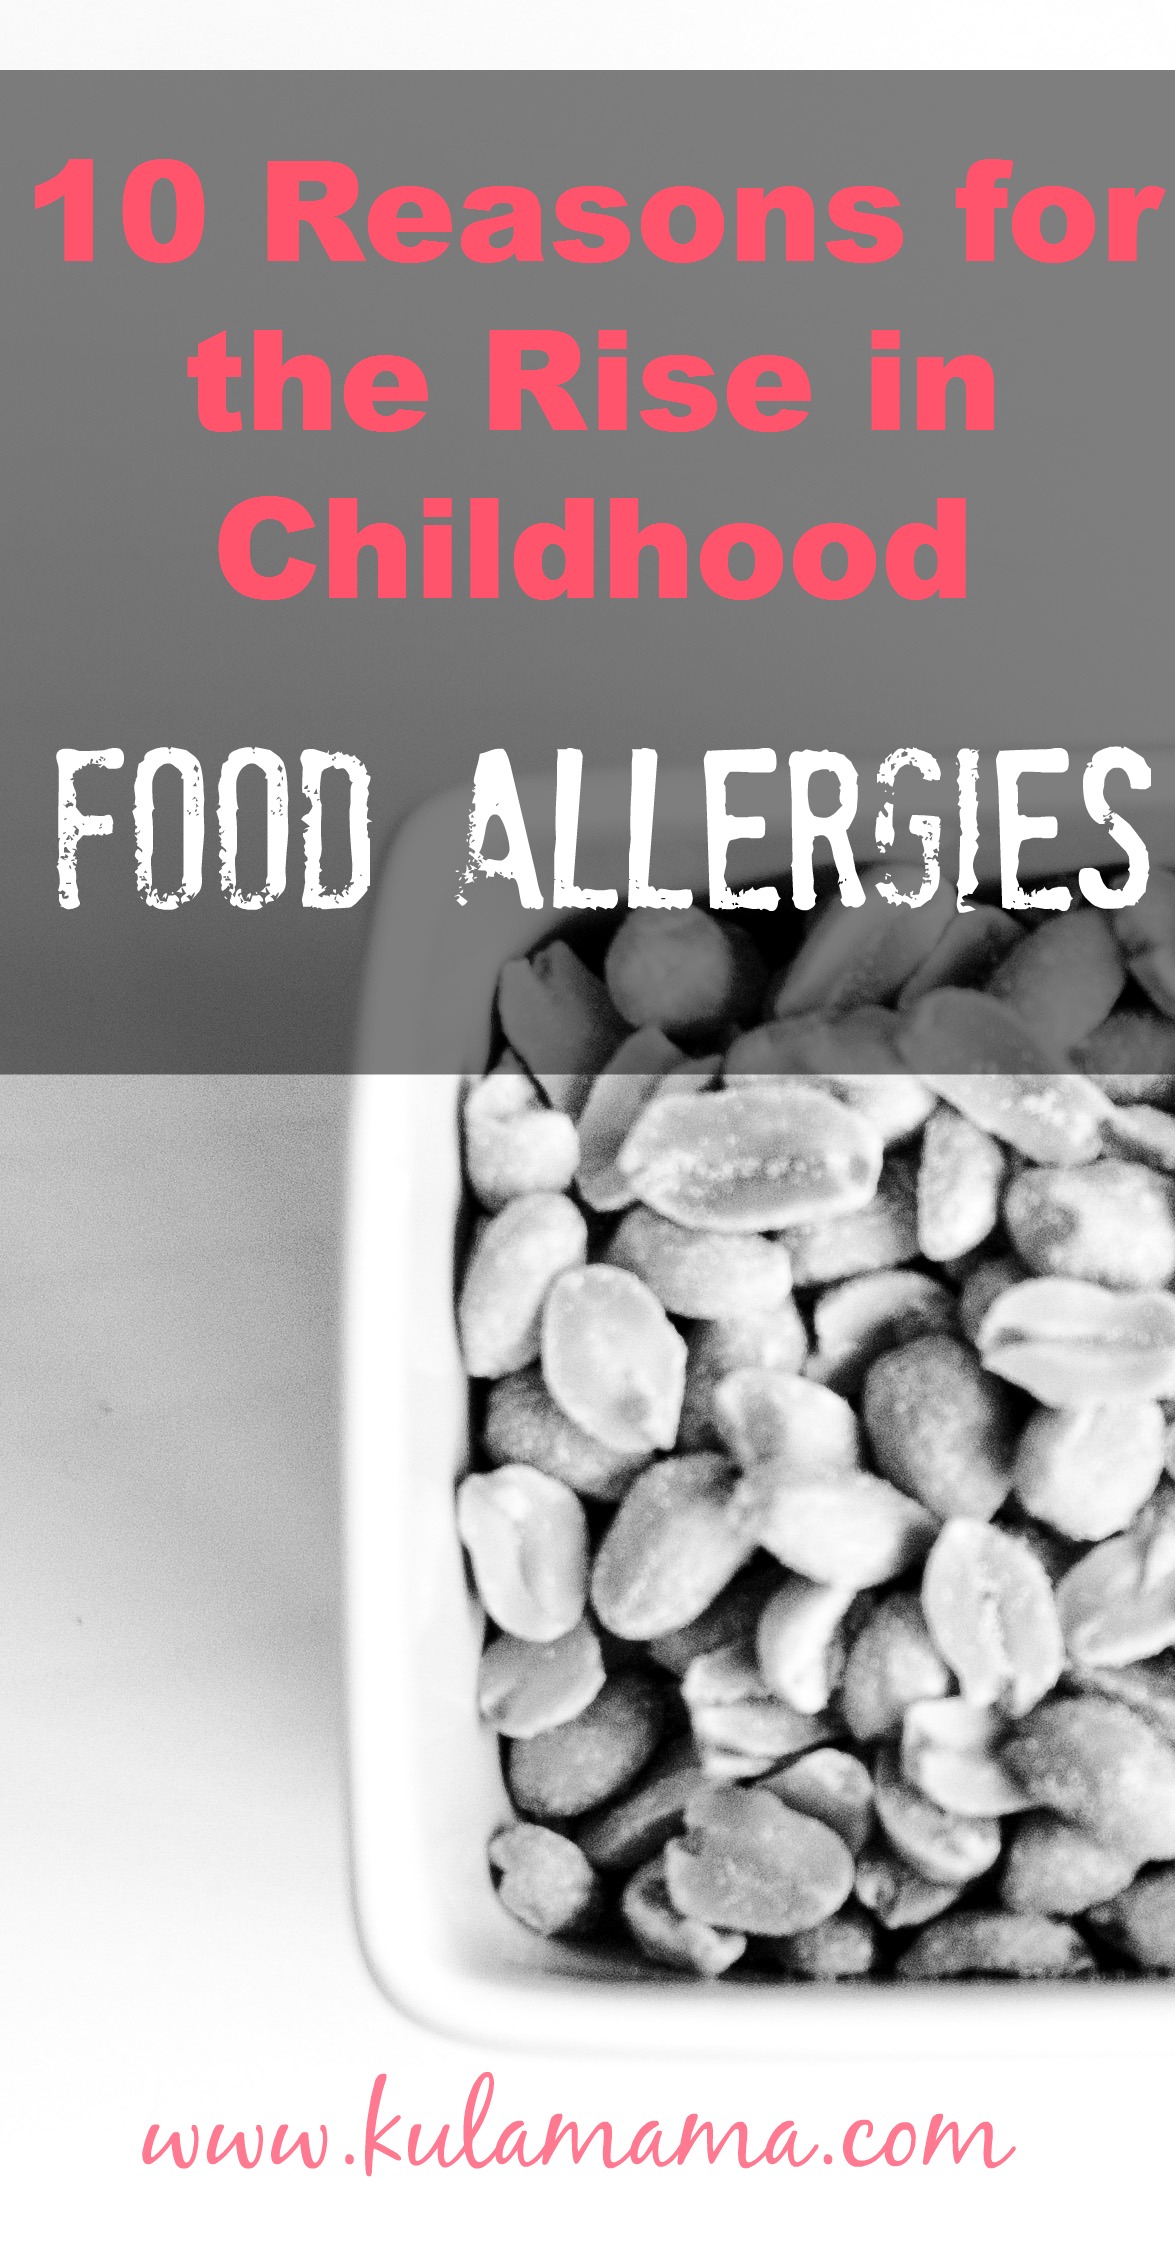 Ten Reasons for the RISE in Childhood Food Allergies by www.kulamama